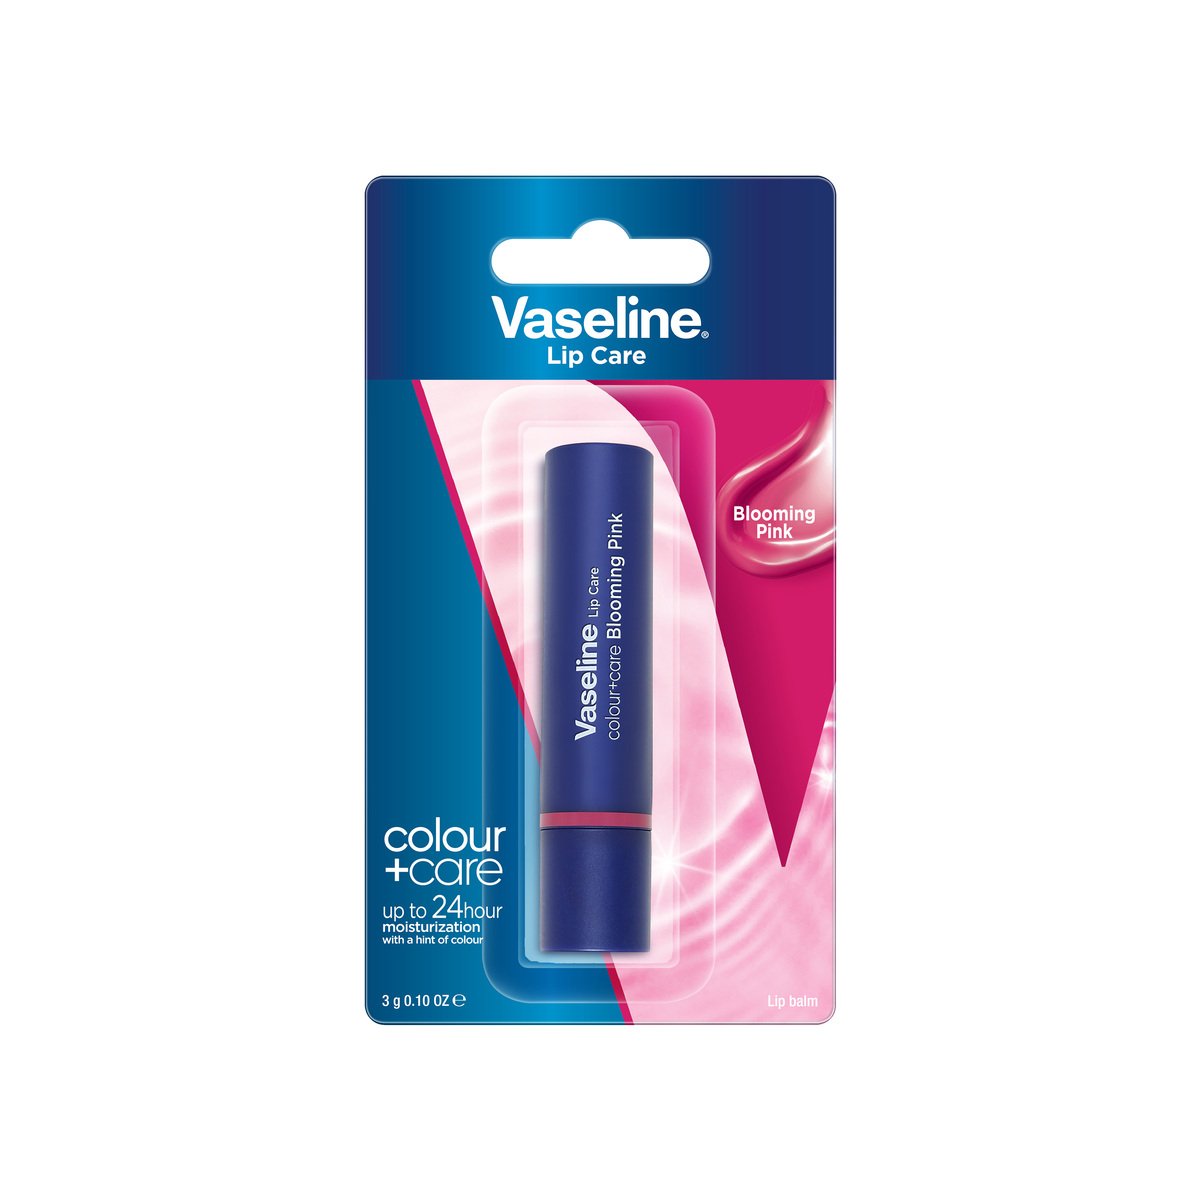 Vaseline Colour + Care Blooming Pink Lip Balm 3 g